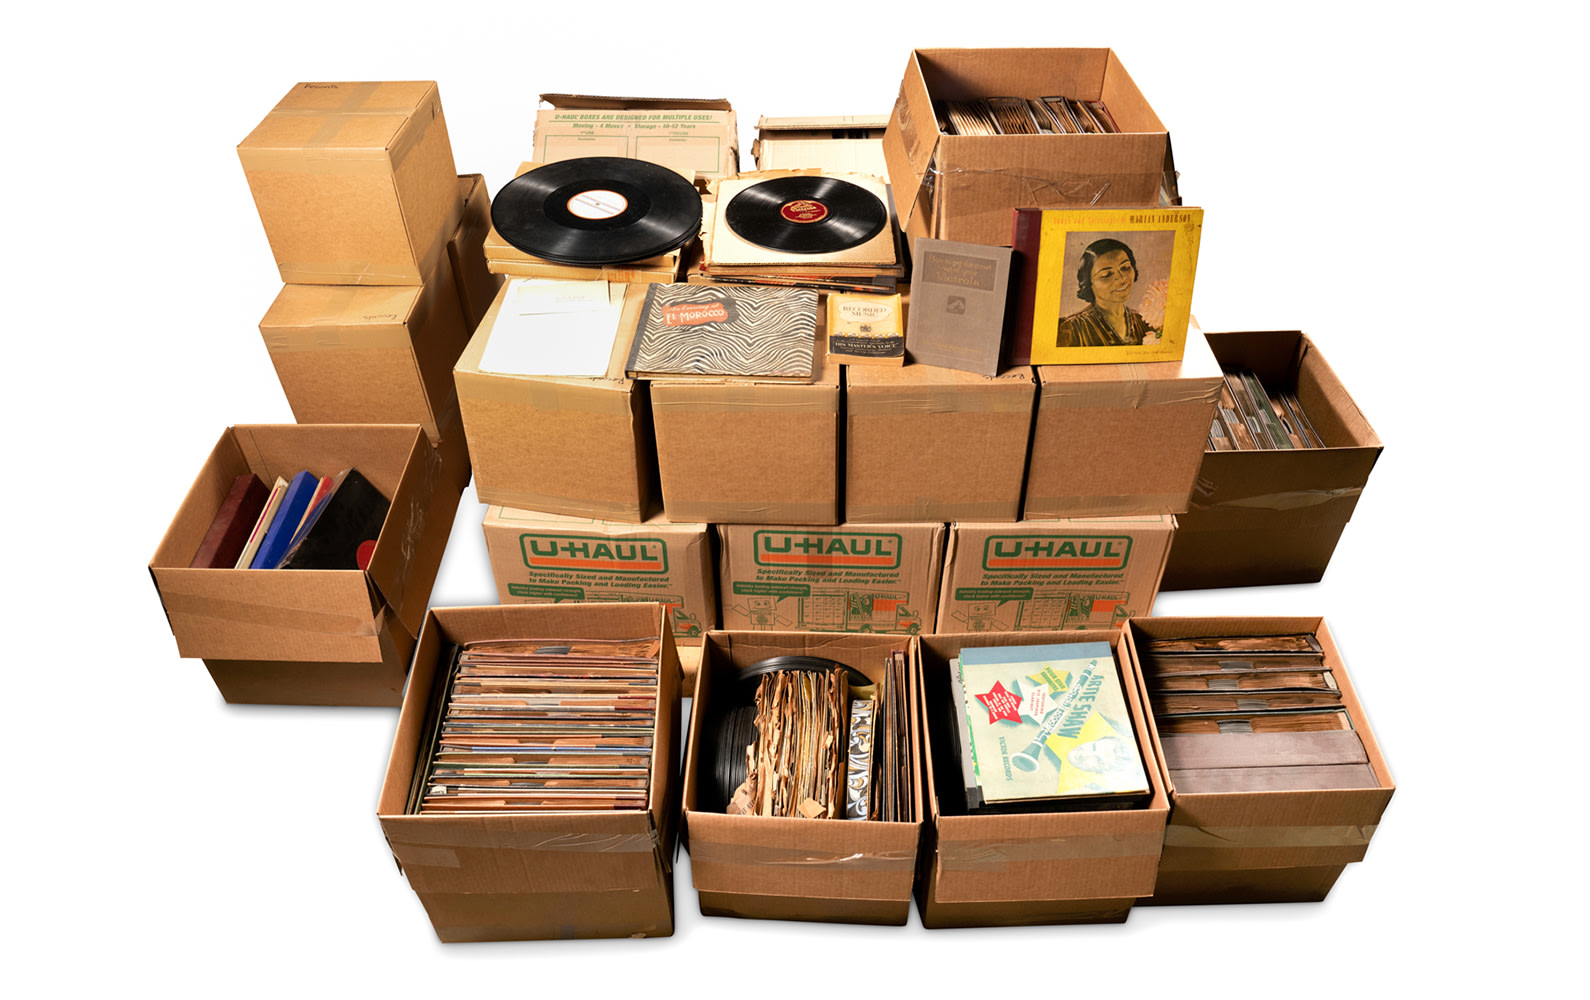 Phil Hill's Vinyl Record Collection, Over 30 Boxes of Records